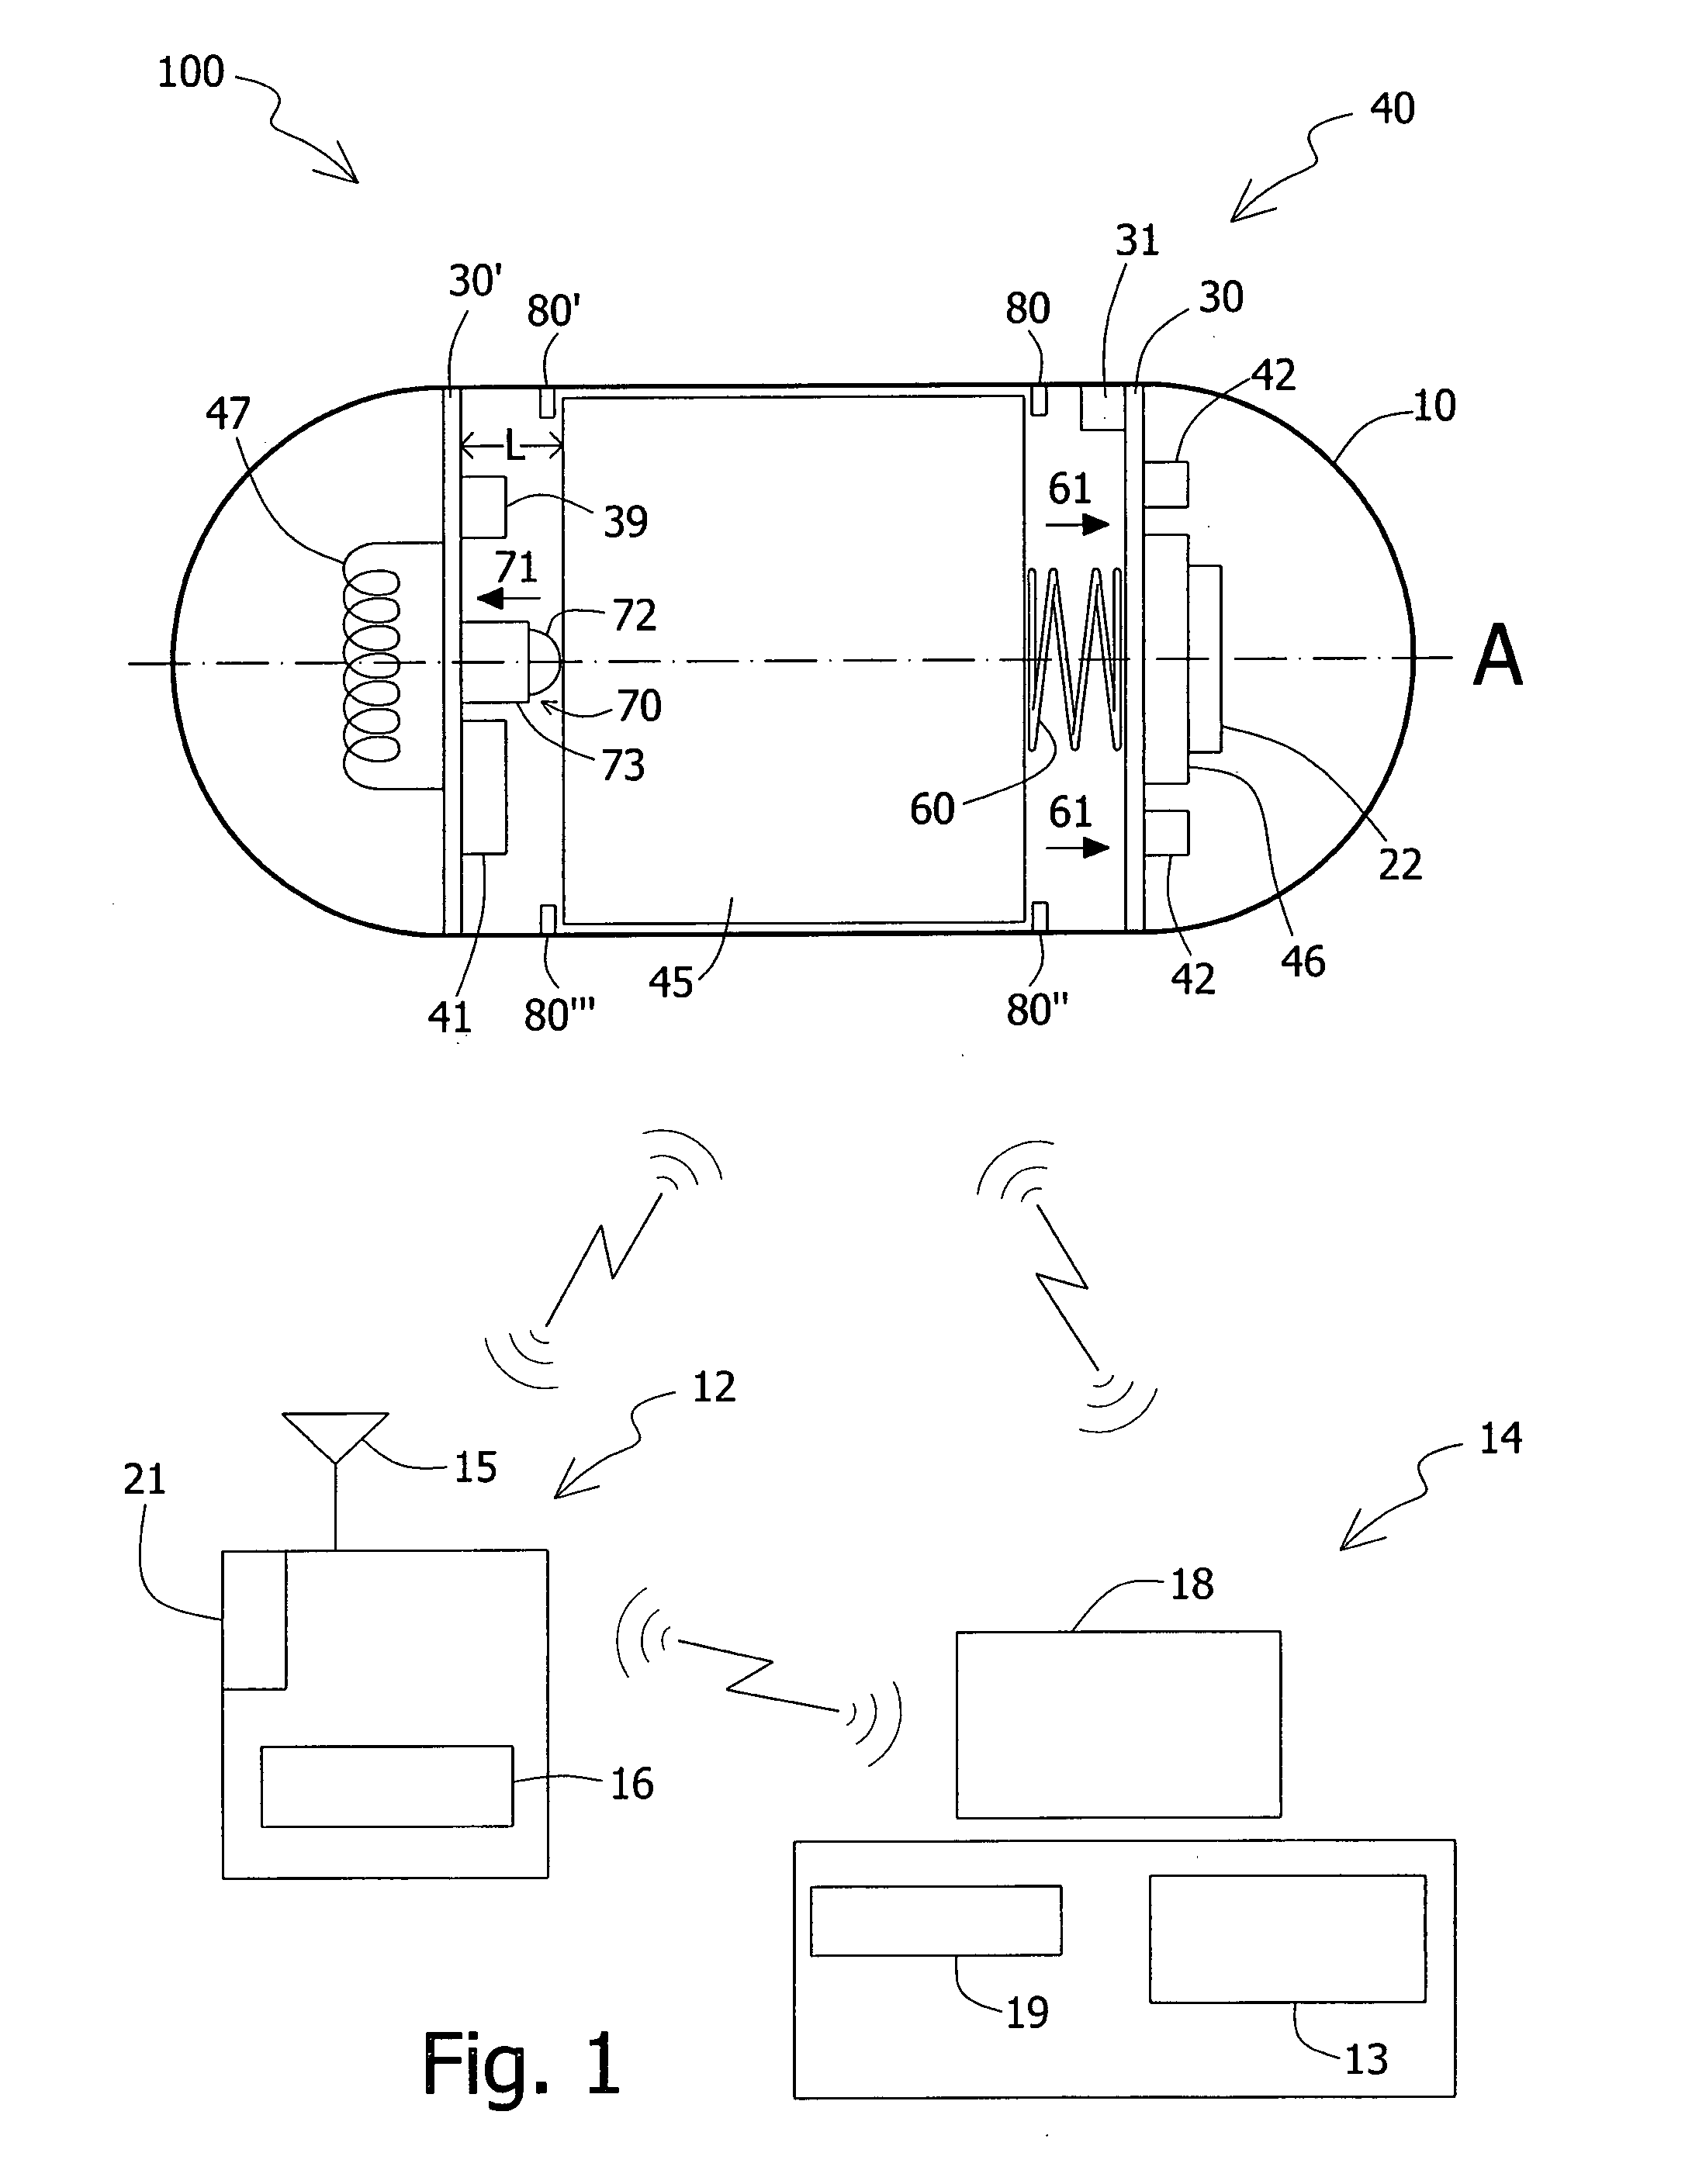 Battery contacts for an in-vivo imaging device